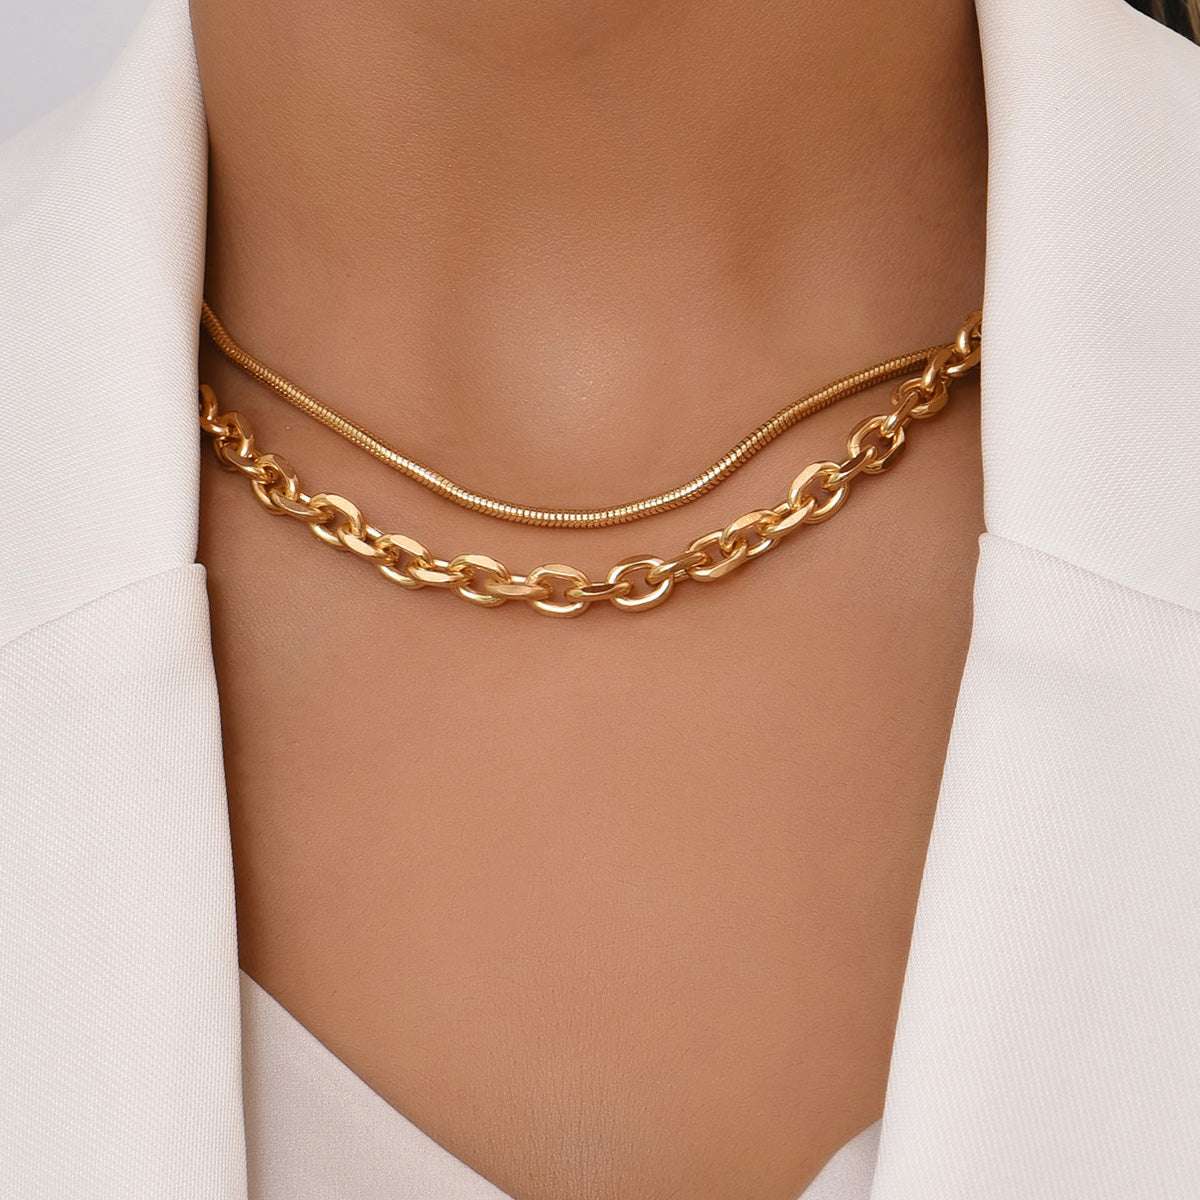 Clavicle Chain, Exquisite, Personality - available at Sparq Mart